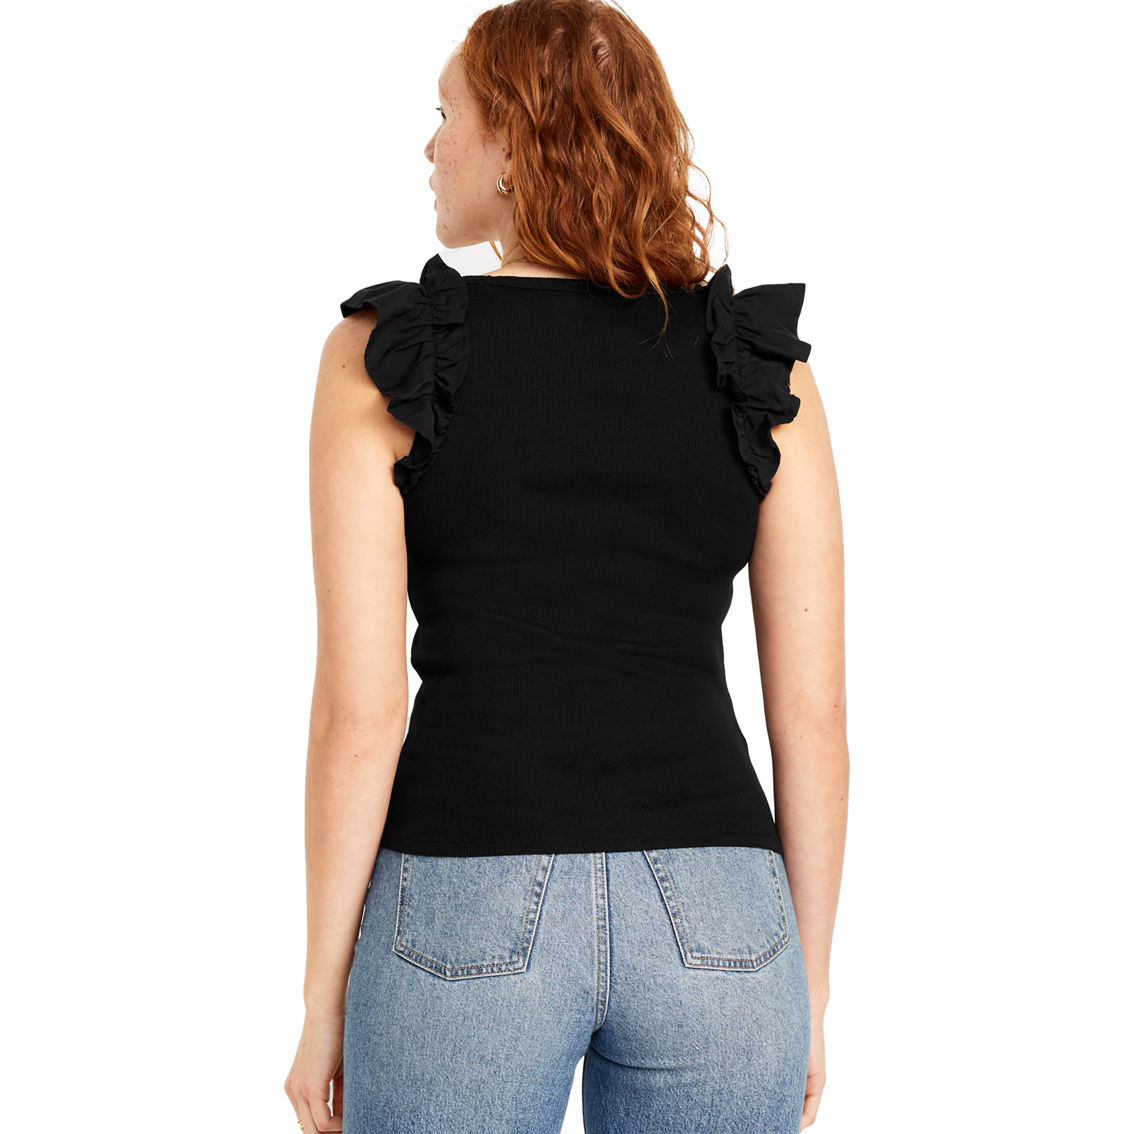 Old Navy Woven Mix Ruffle Top - Image 2 of 2